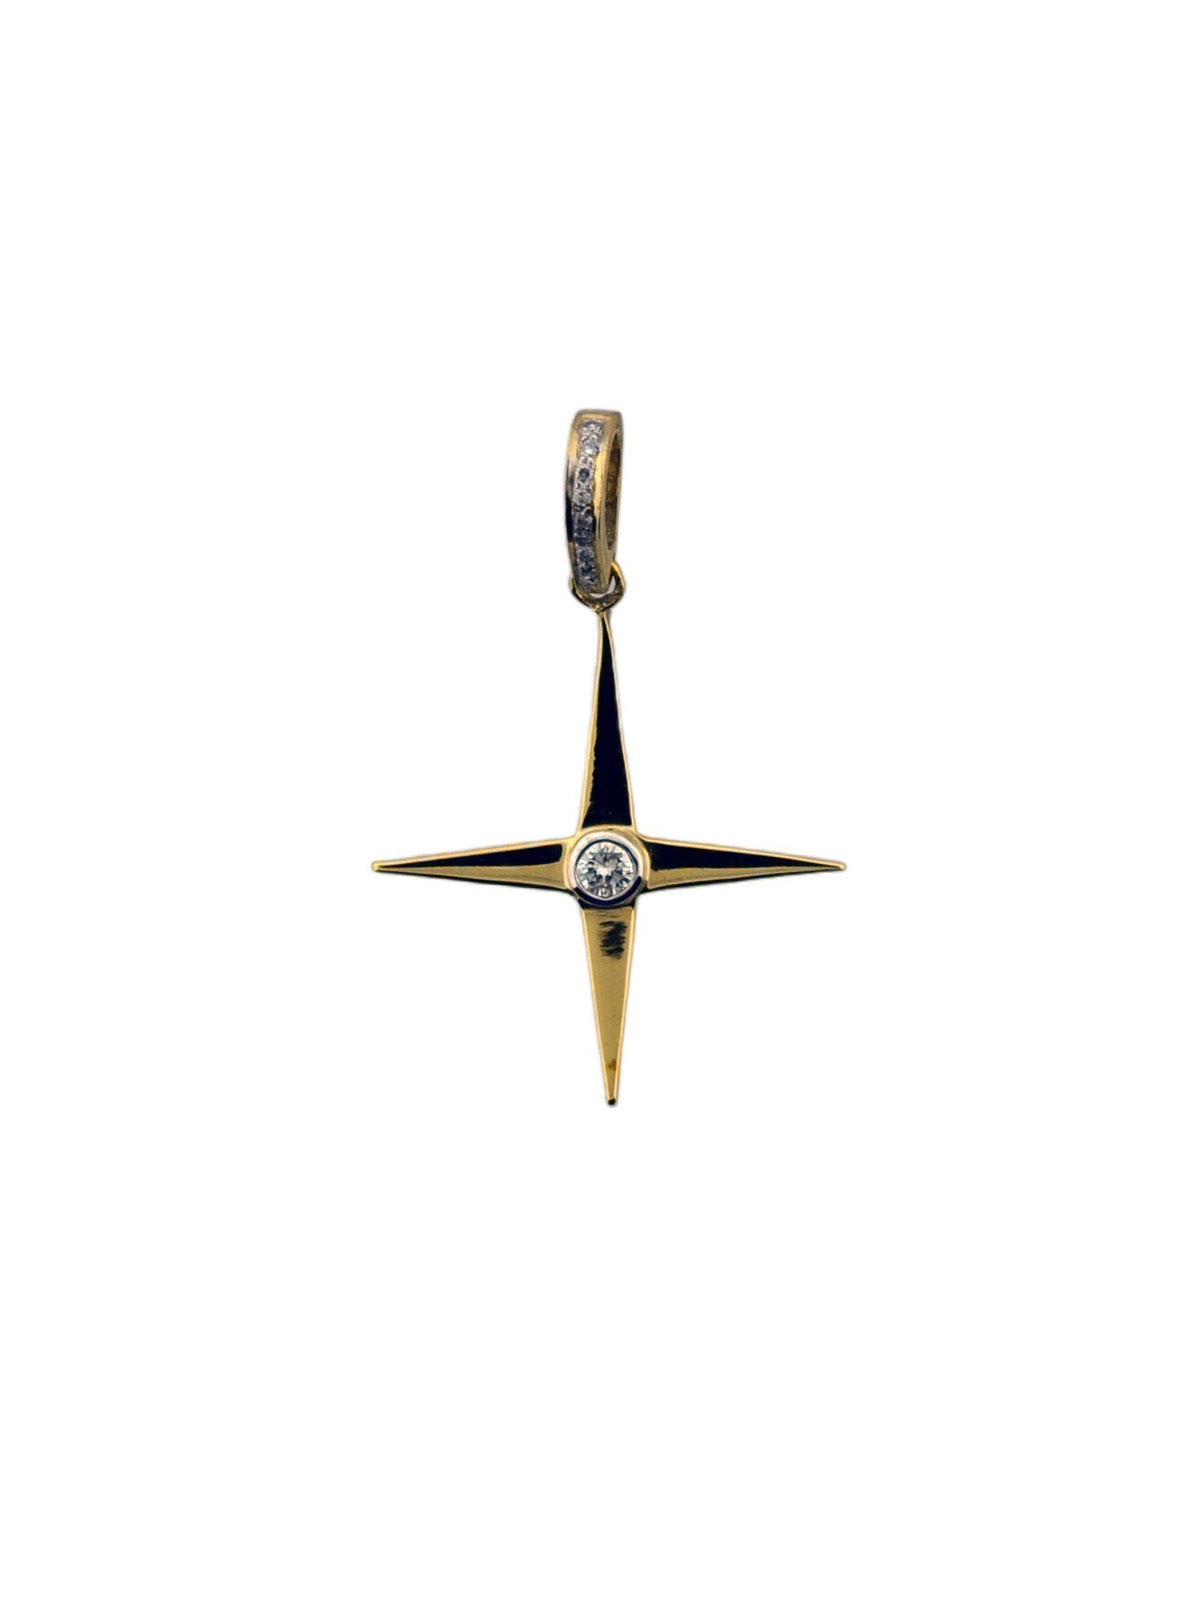 Brass Four Point Star with Center Diamond and Pave Bale.